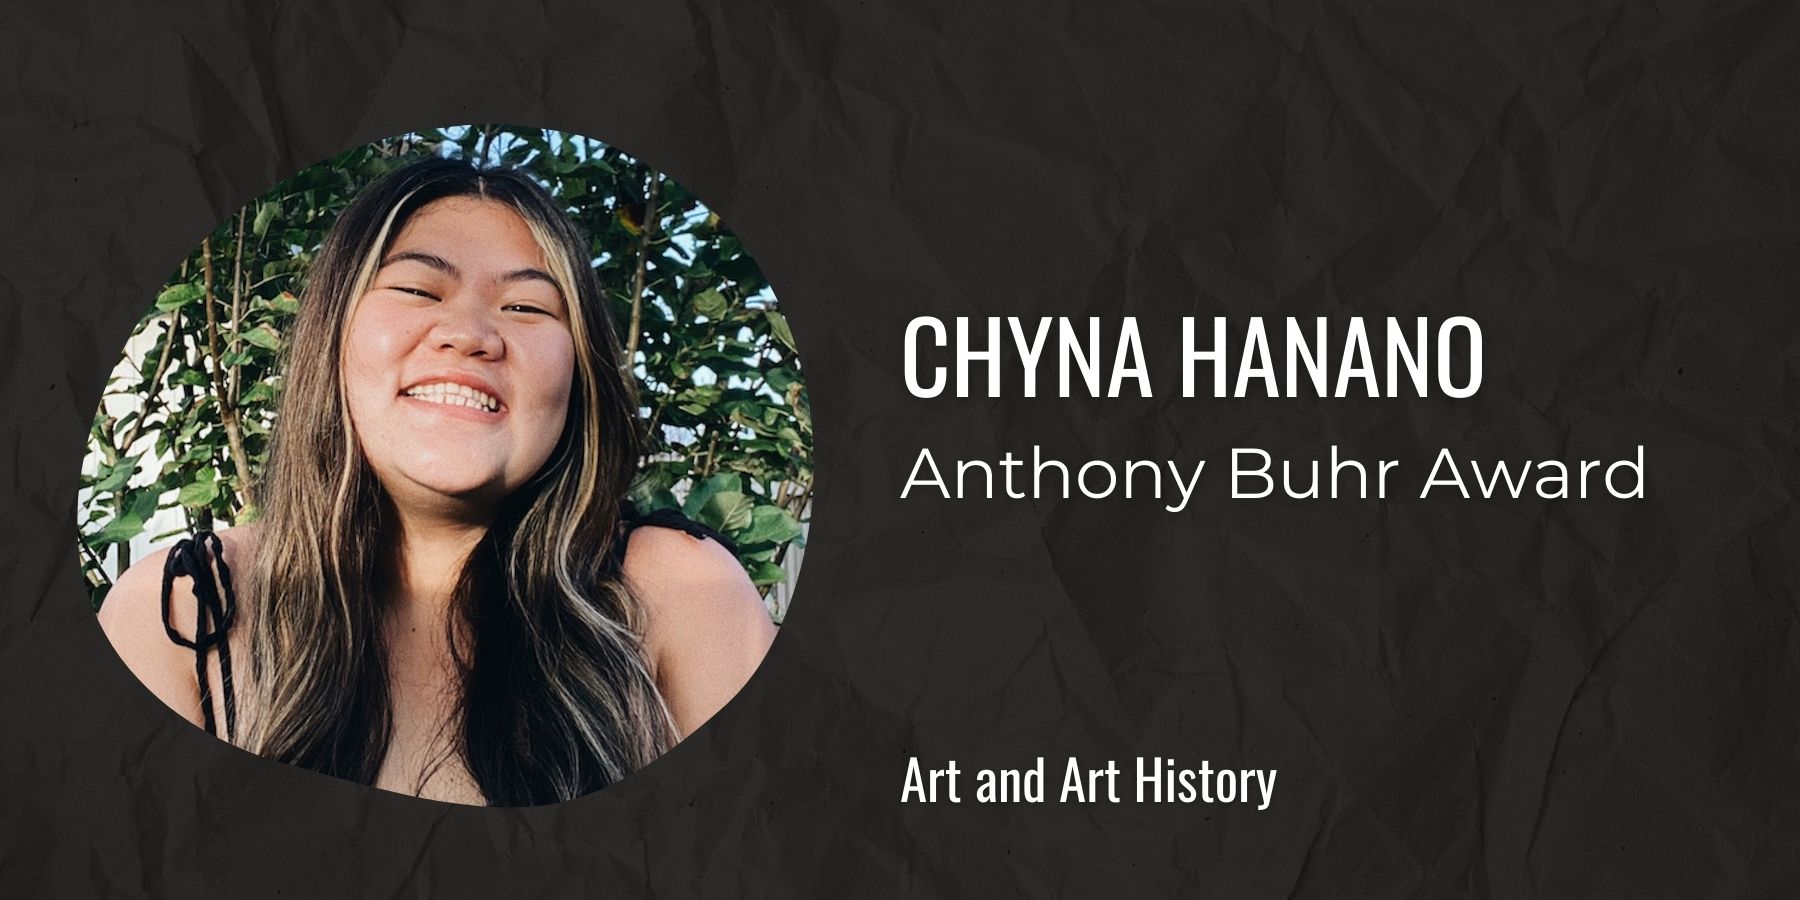 Image of Chyna Hanano and text: Anthony Buhr Award, Art and Art History
